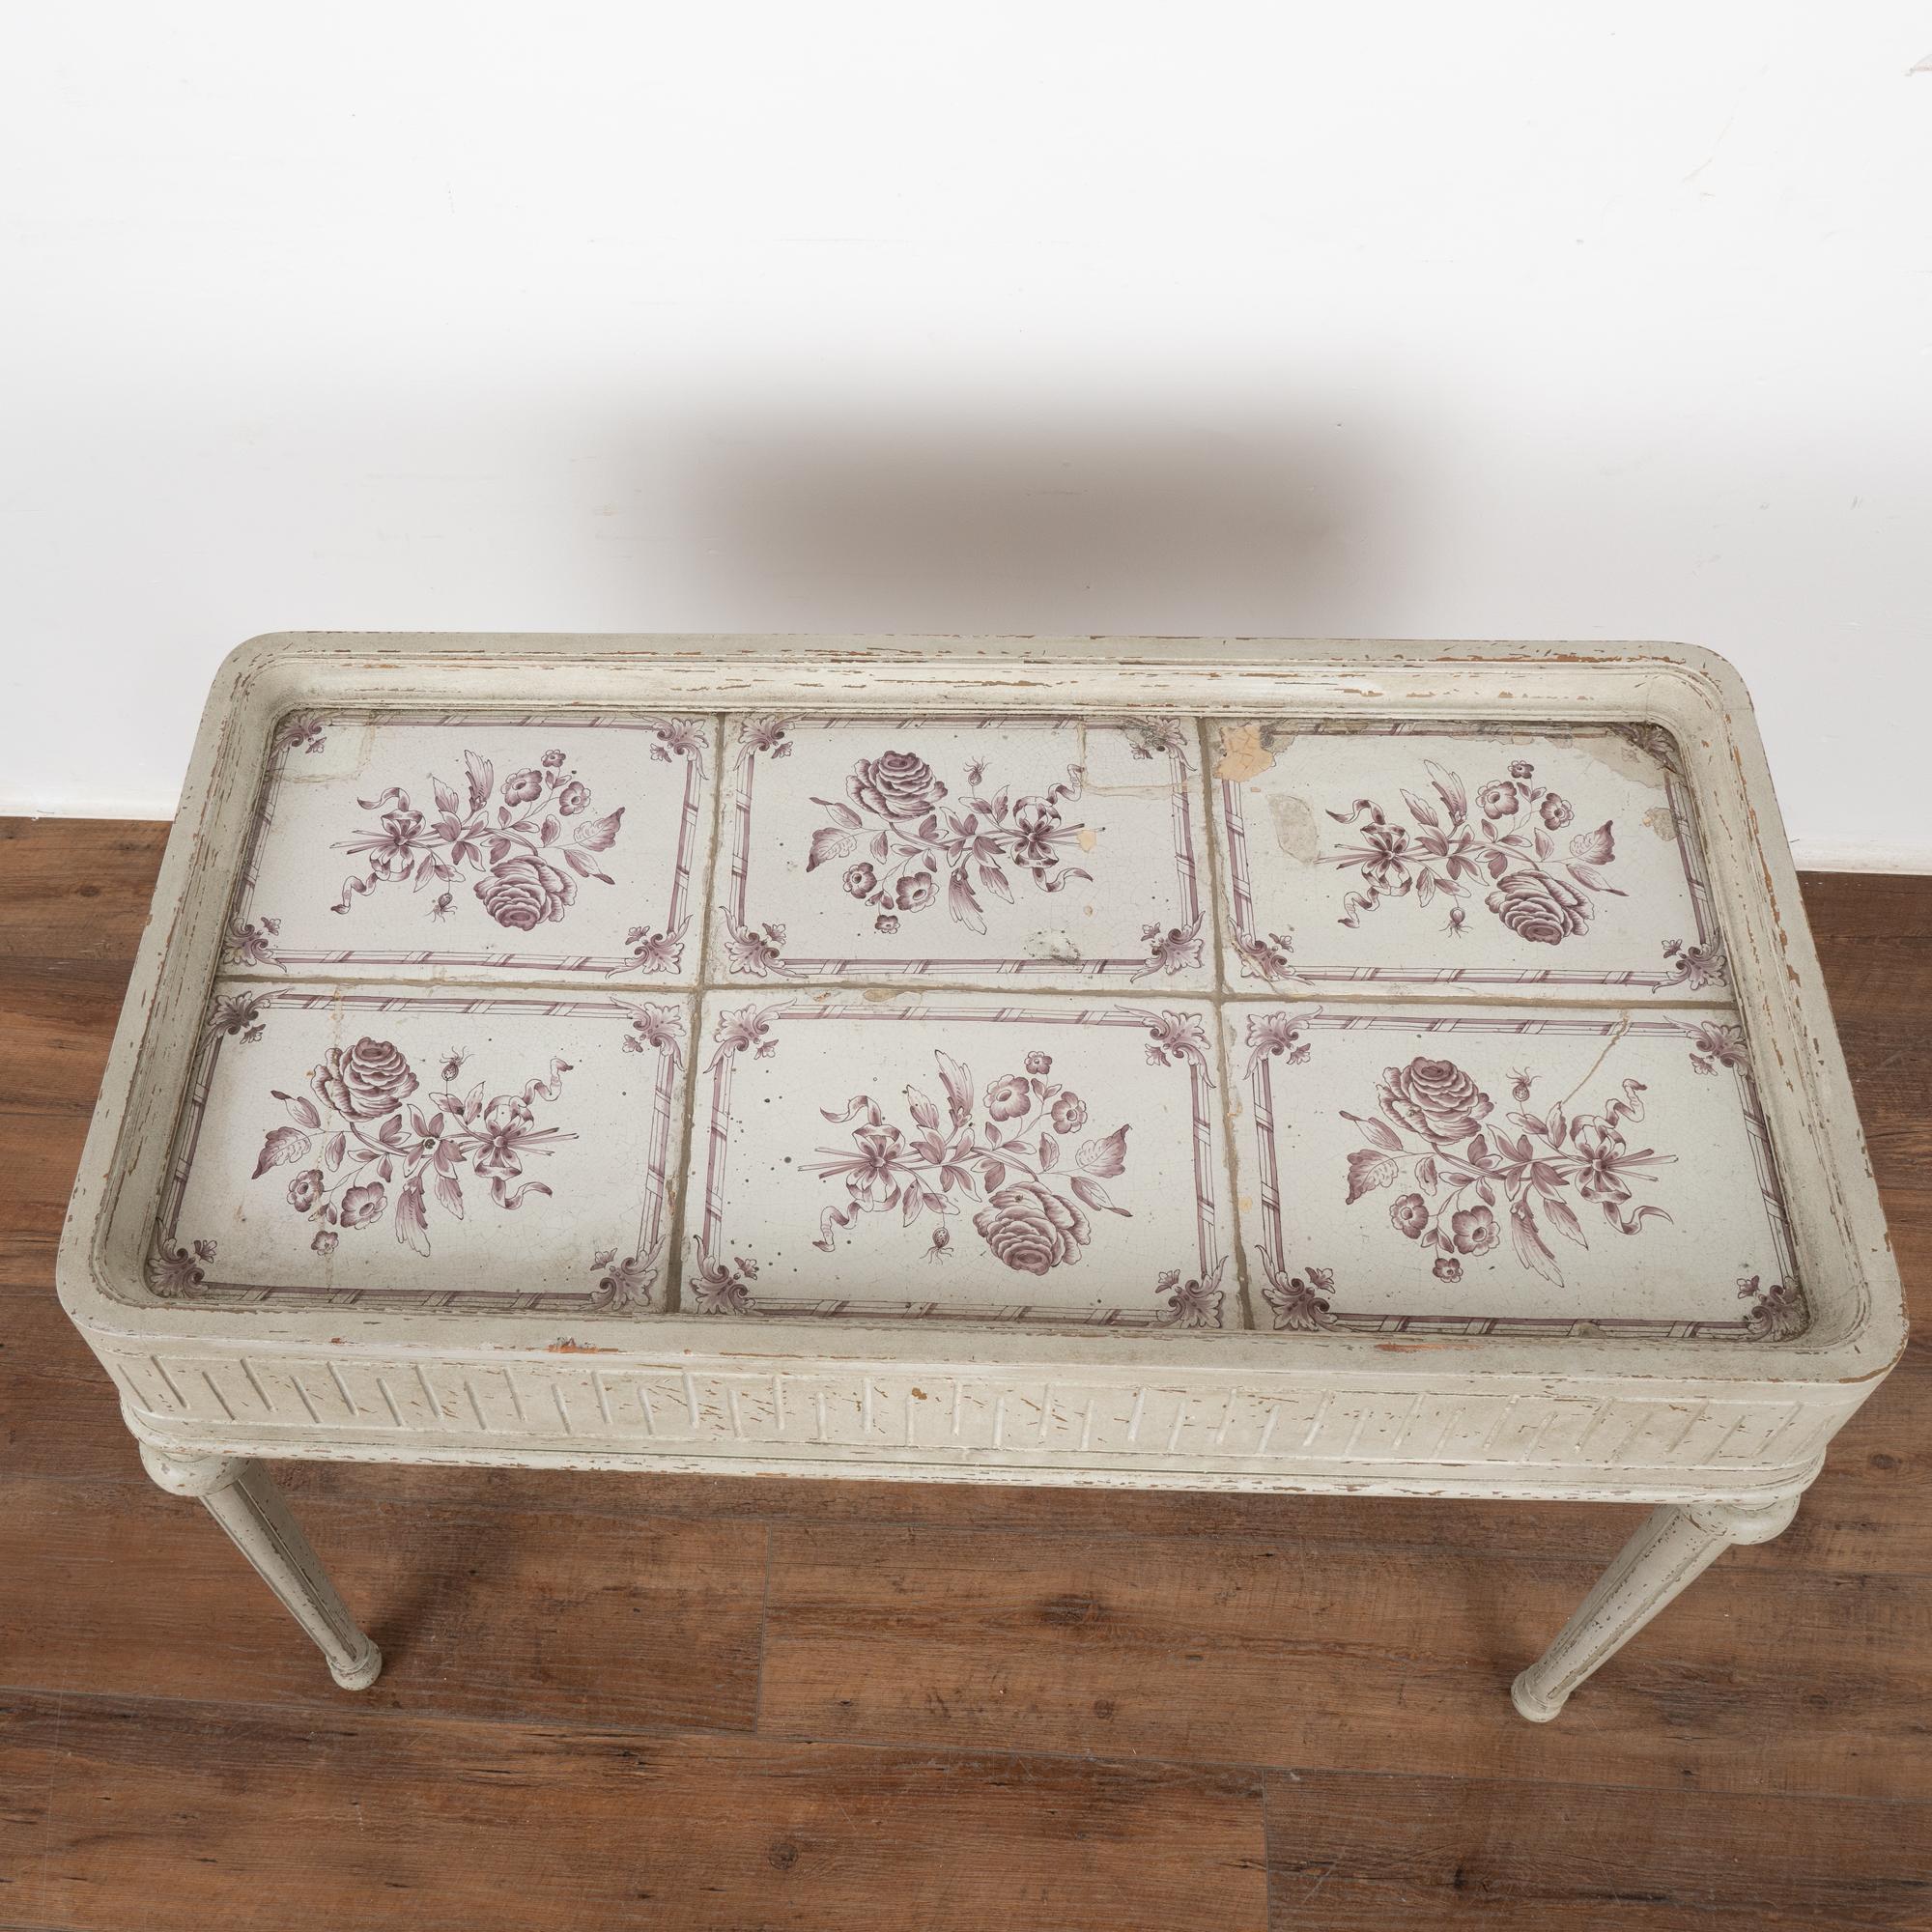 19th Century Gustavian White Tile Top Tea Side Table with Purple Flowers Sweden circa 1860-80 For Sale